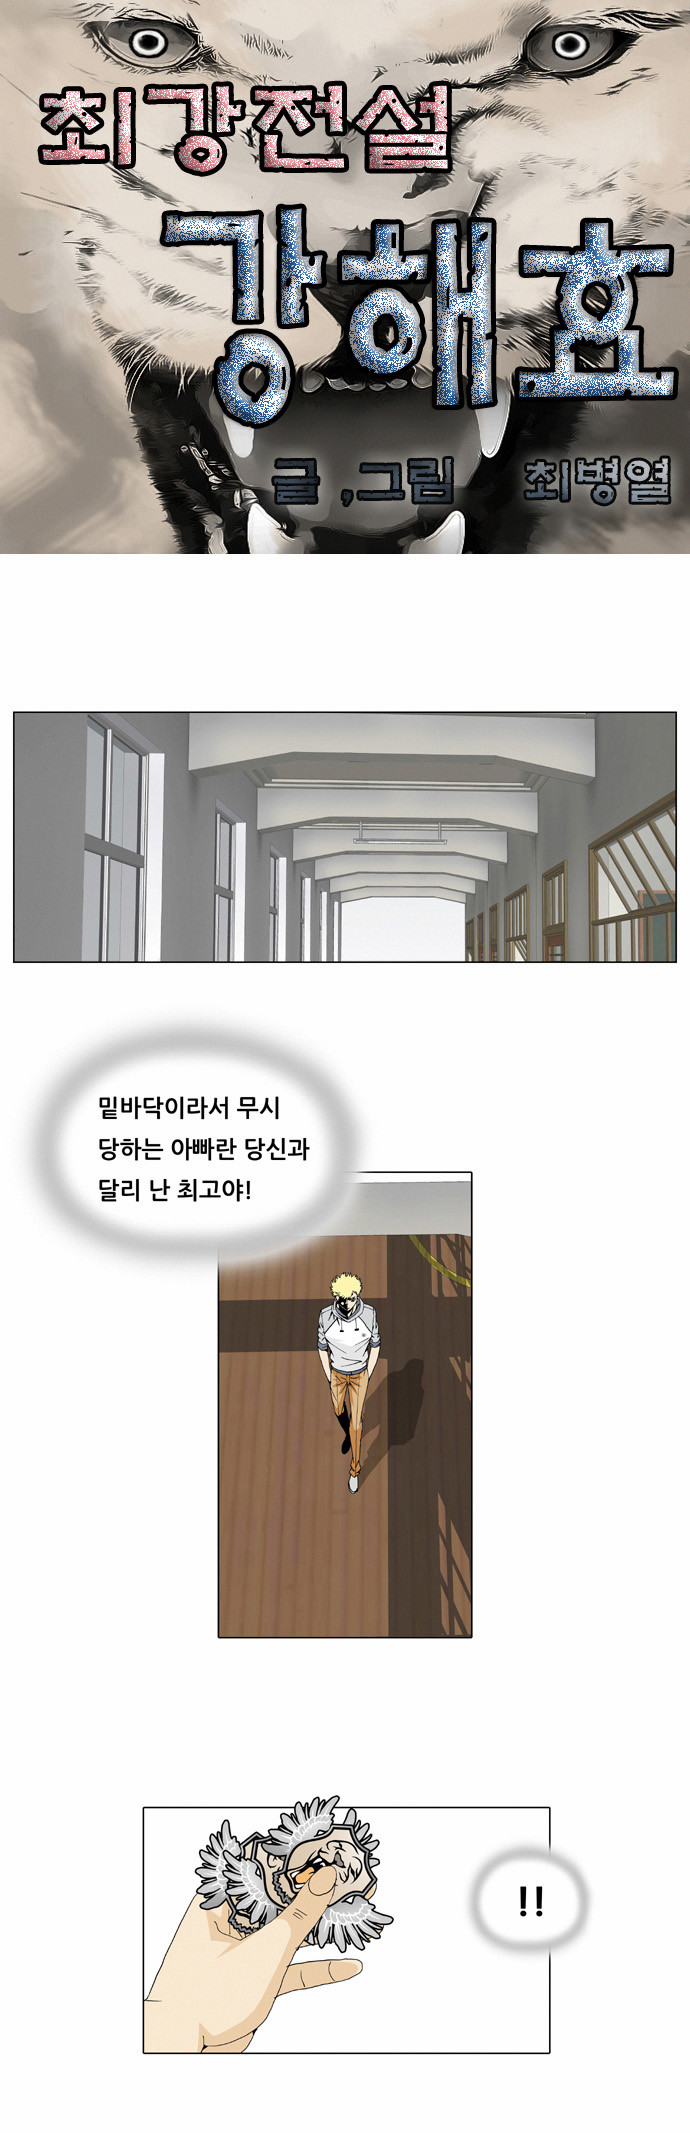 Ultimate Legend - Kang Hae Hyo - Chapter 29 - Page 3